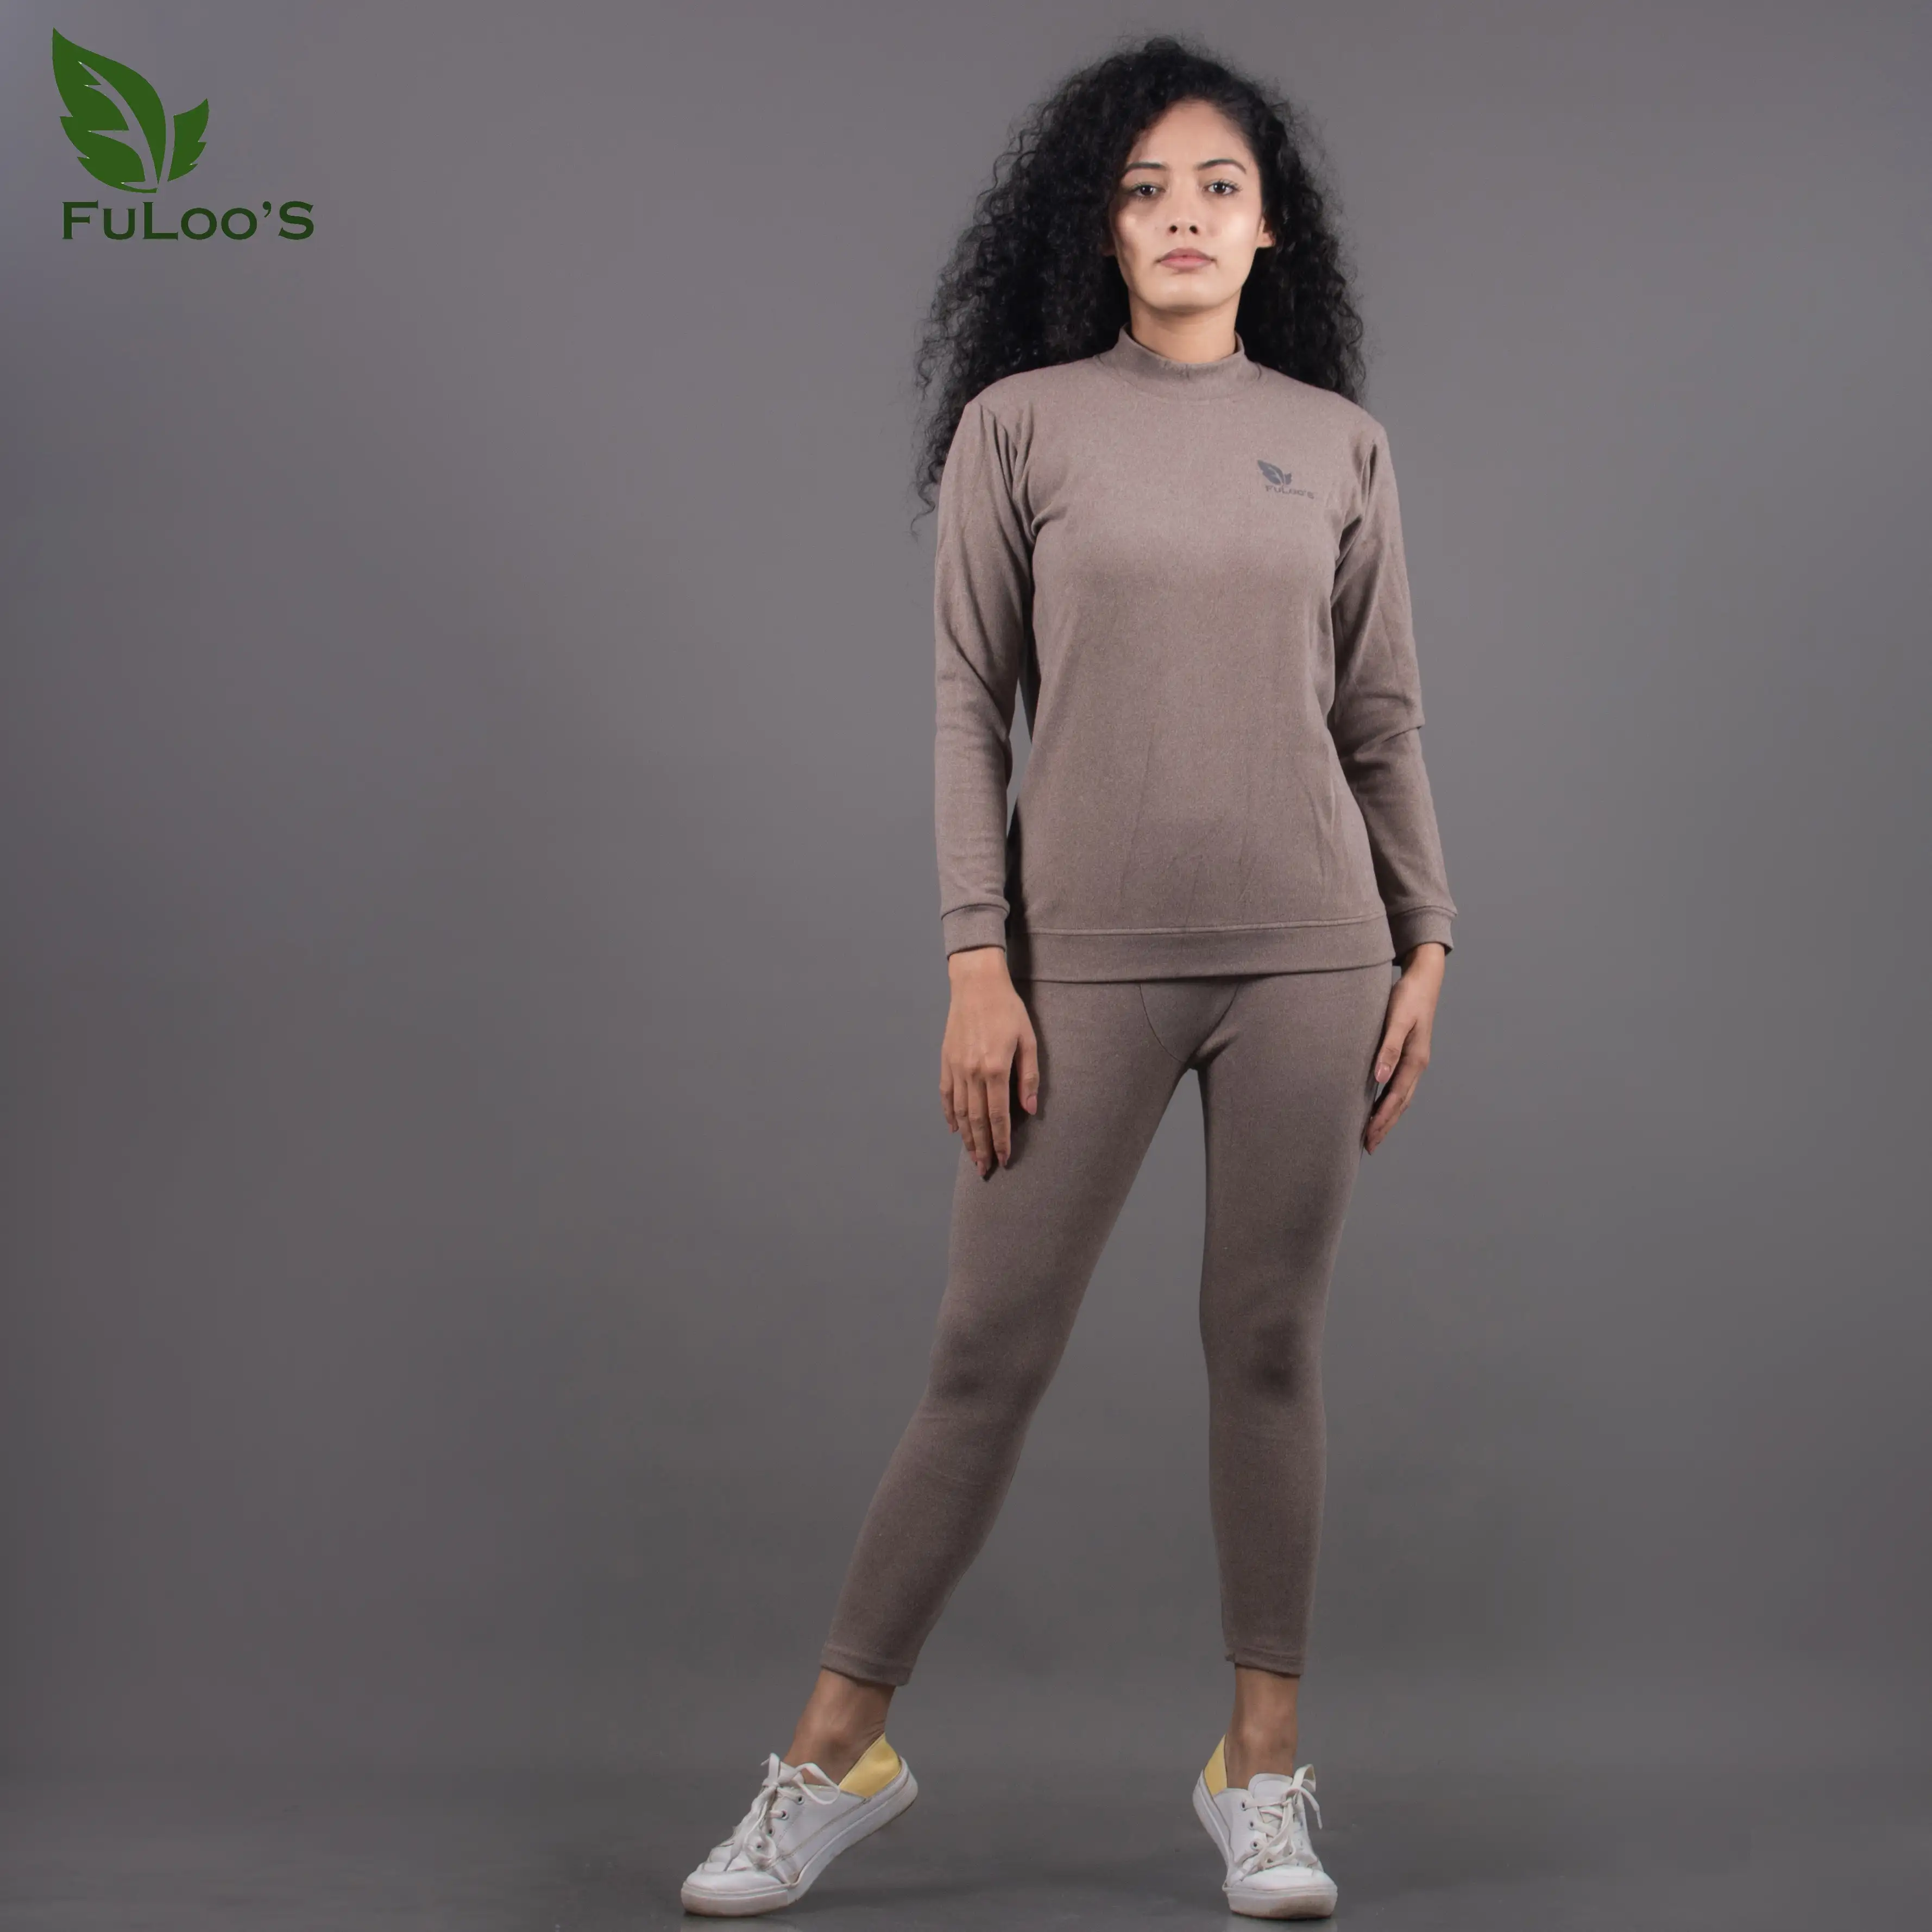 Fuloo's Brown Winter Thermal Wear For Women in Nepal - Buy Thermal Wear at  Best Price at